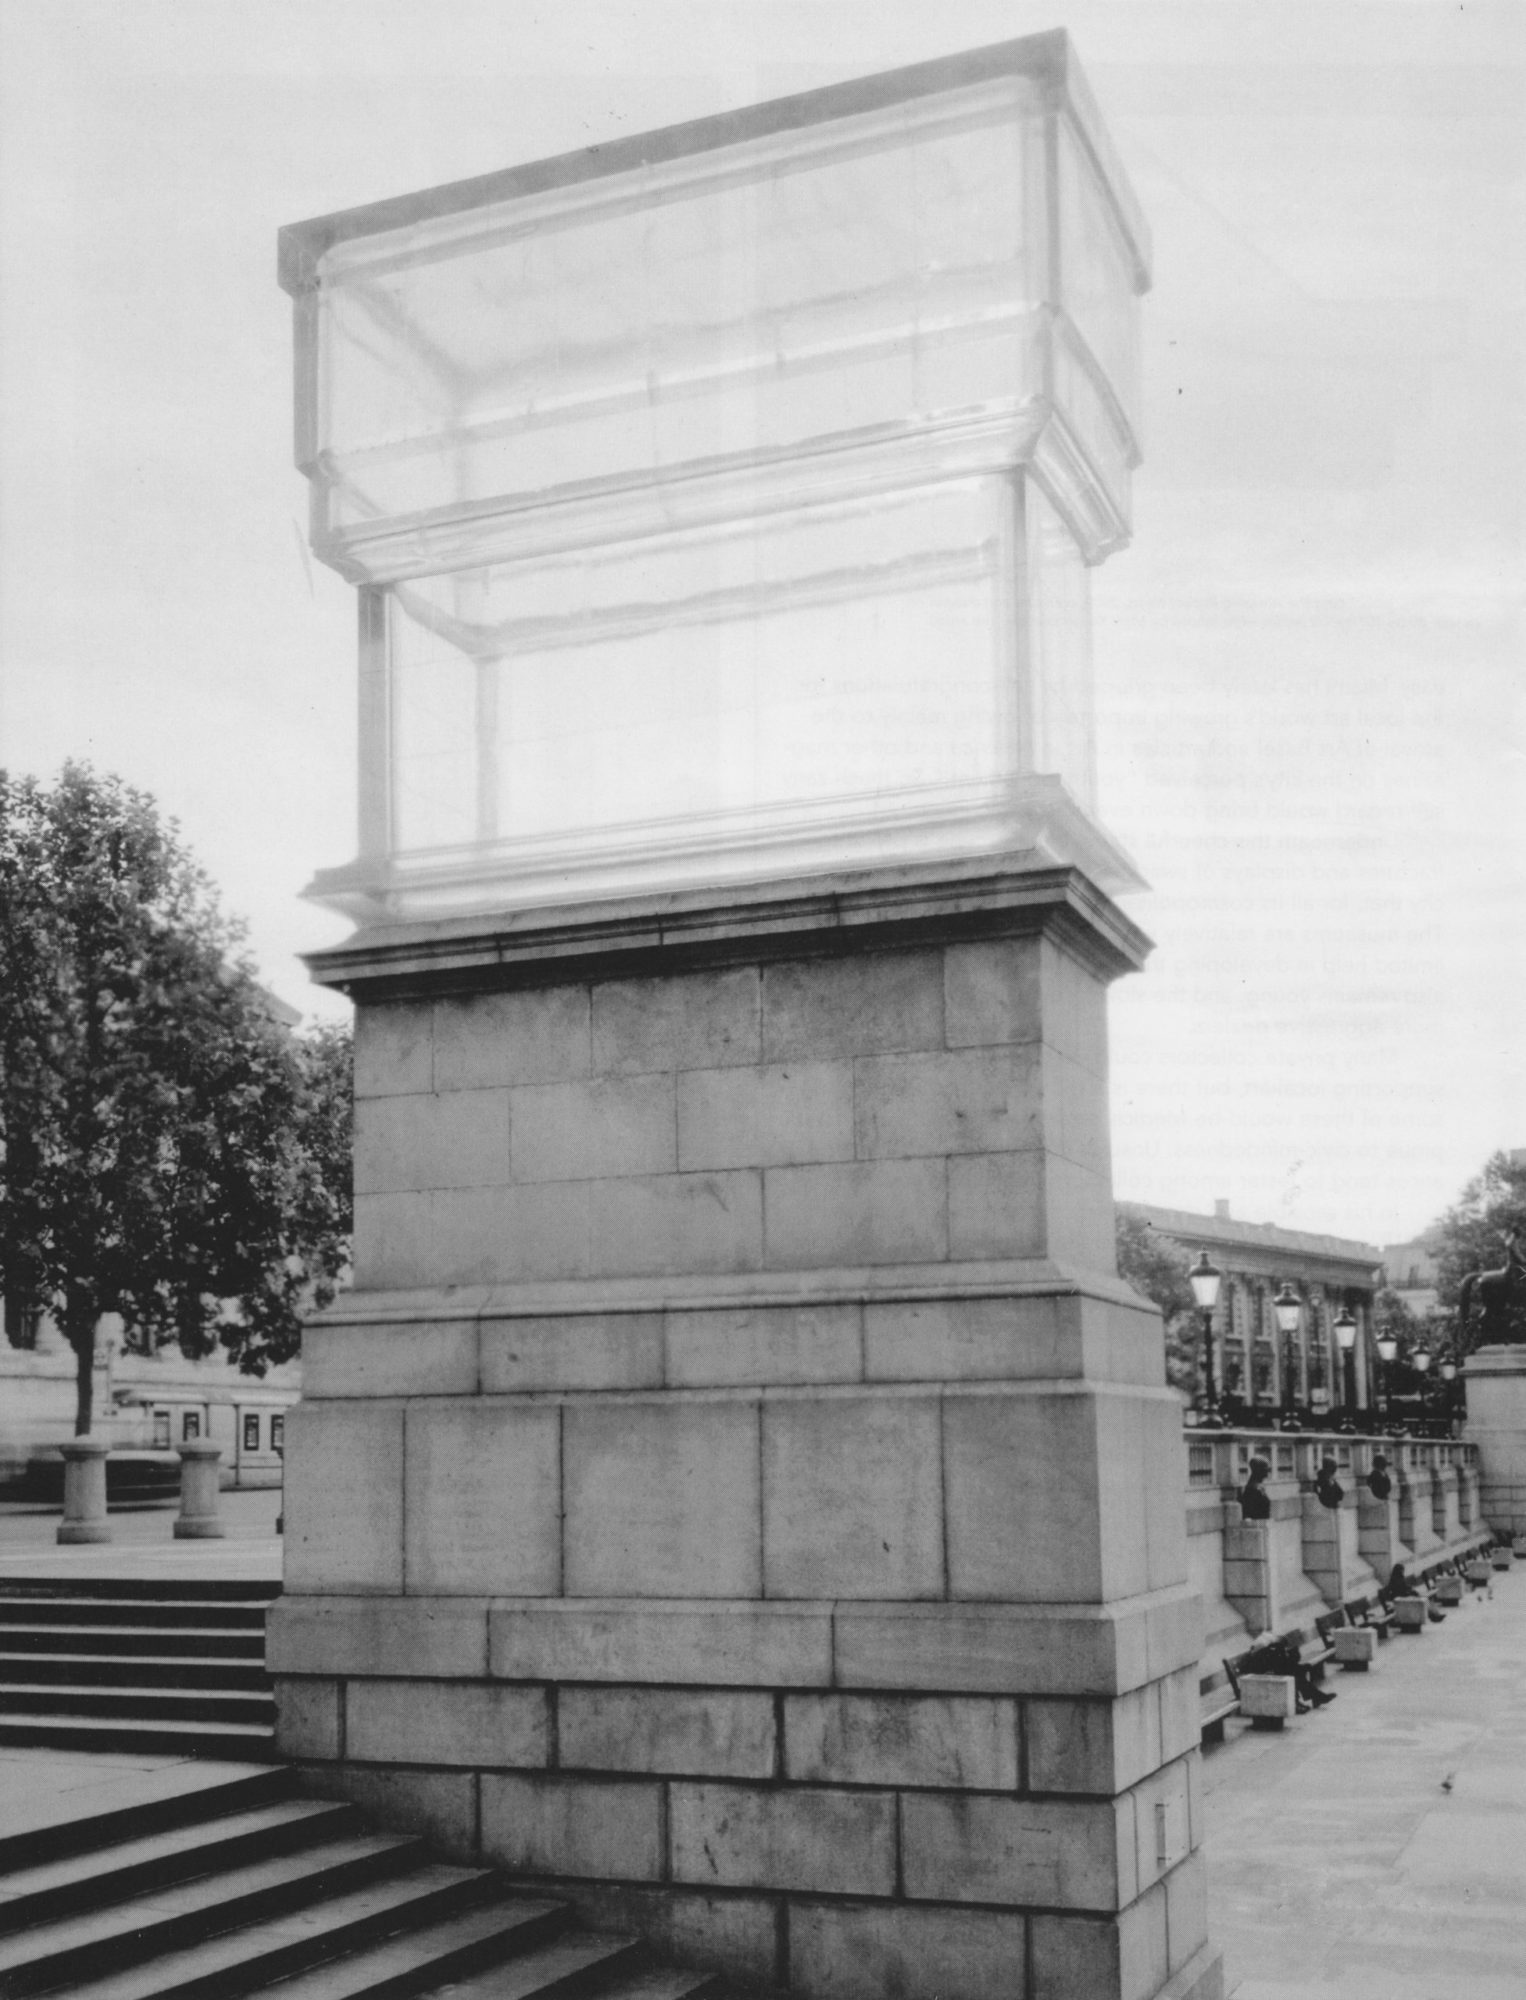 A transparent sculpture of a two-leveled wardrobe atop a stone column. It looks like a drawer or dresser from the behind, with the bottom half being a smaller portion. Around the sculpture is an outdoor atrium, a walkway and trees behind it, with stairs leading up to it.